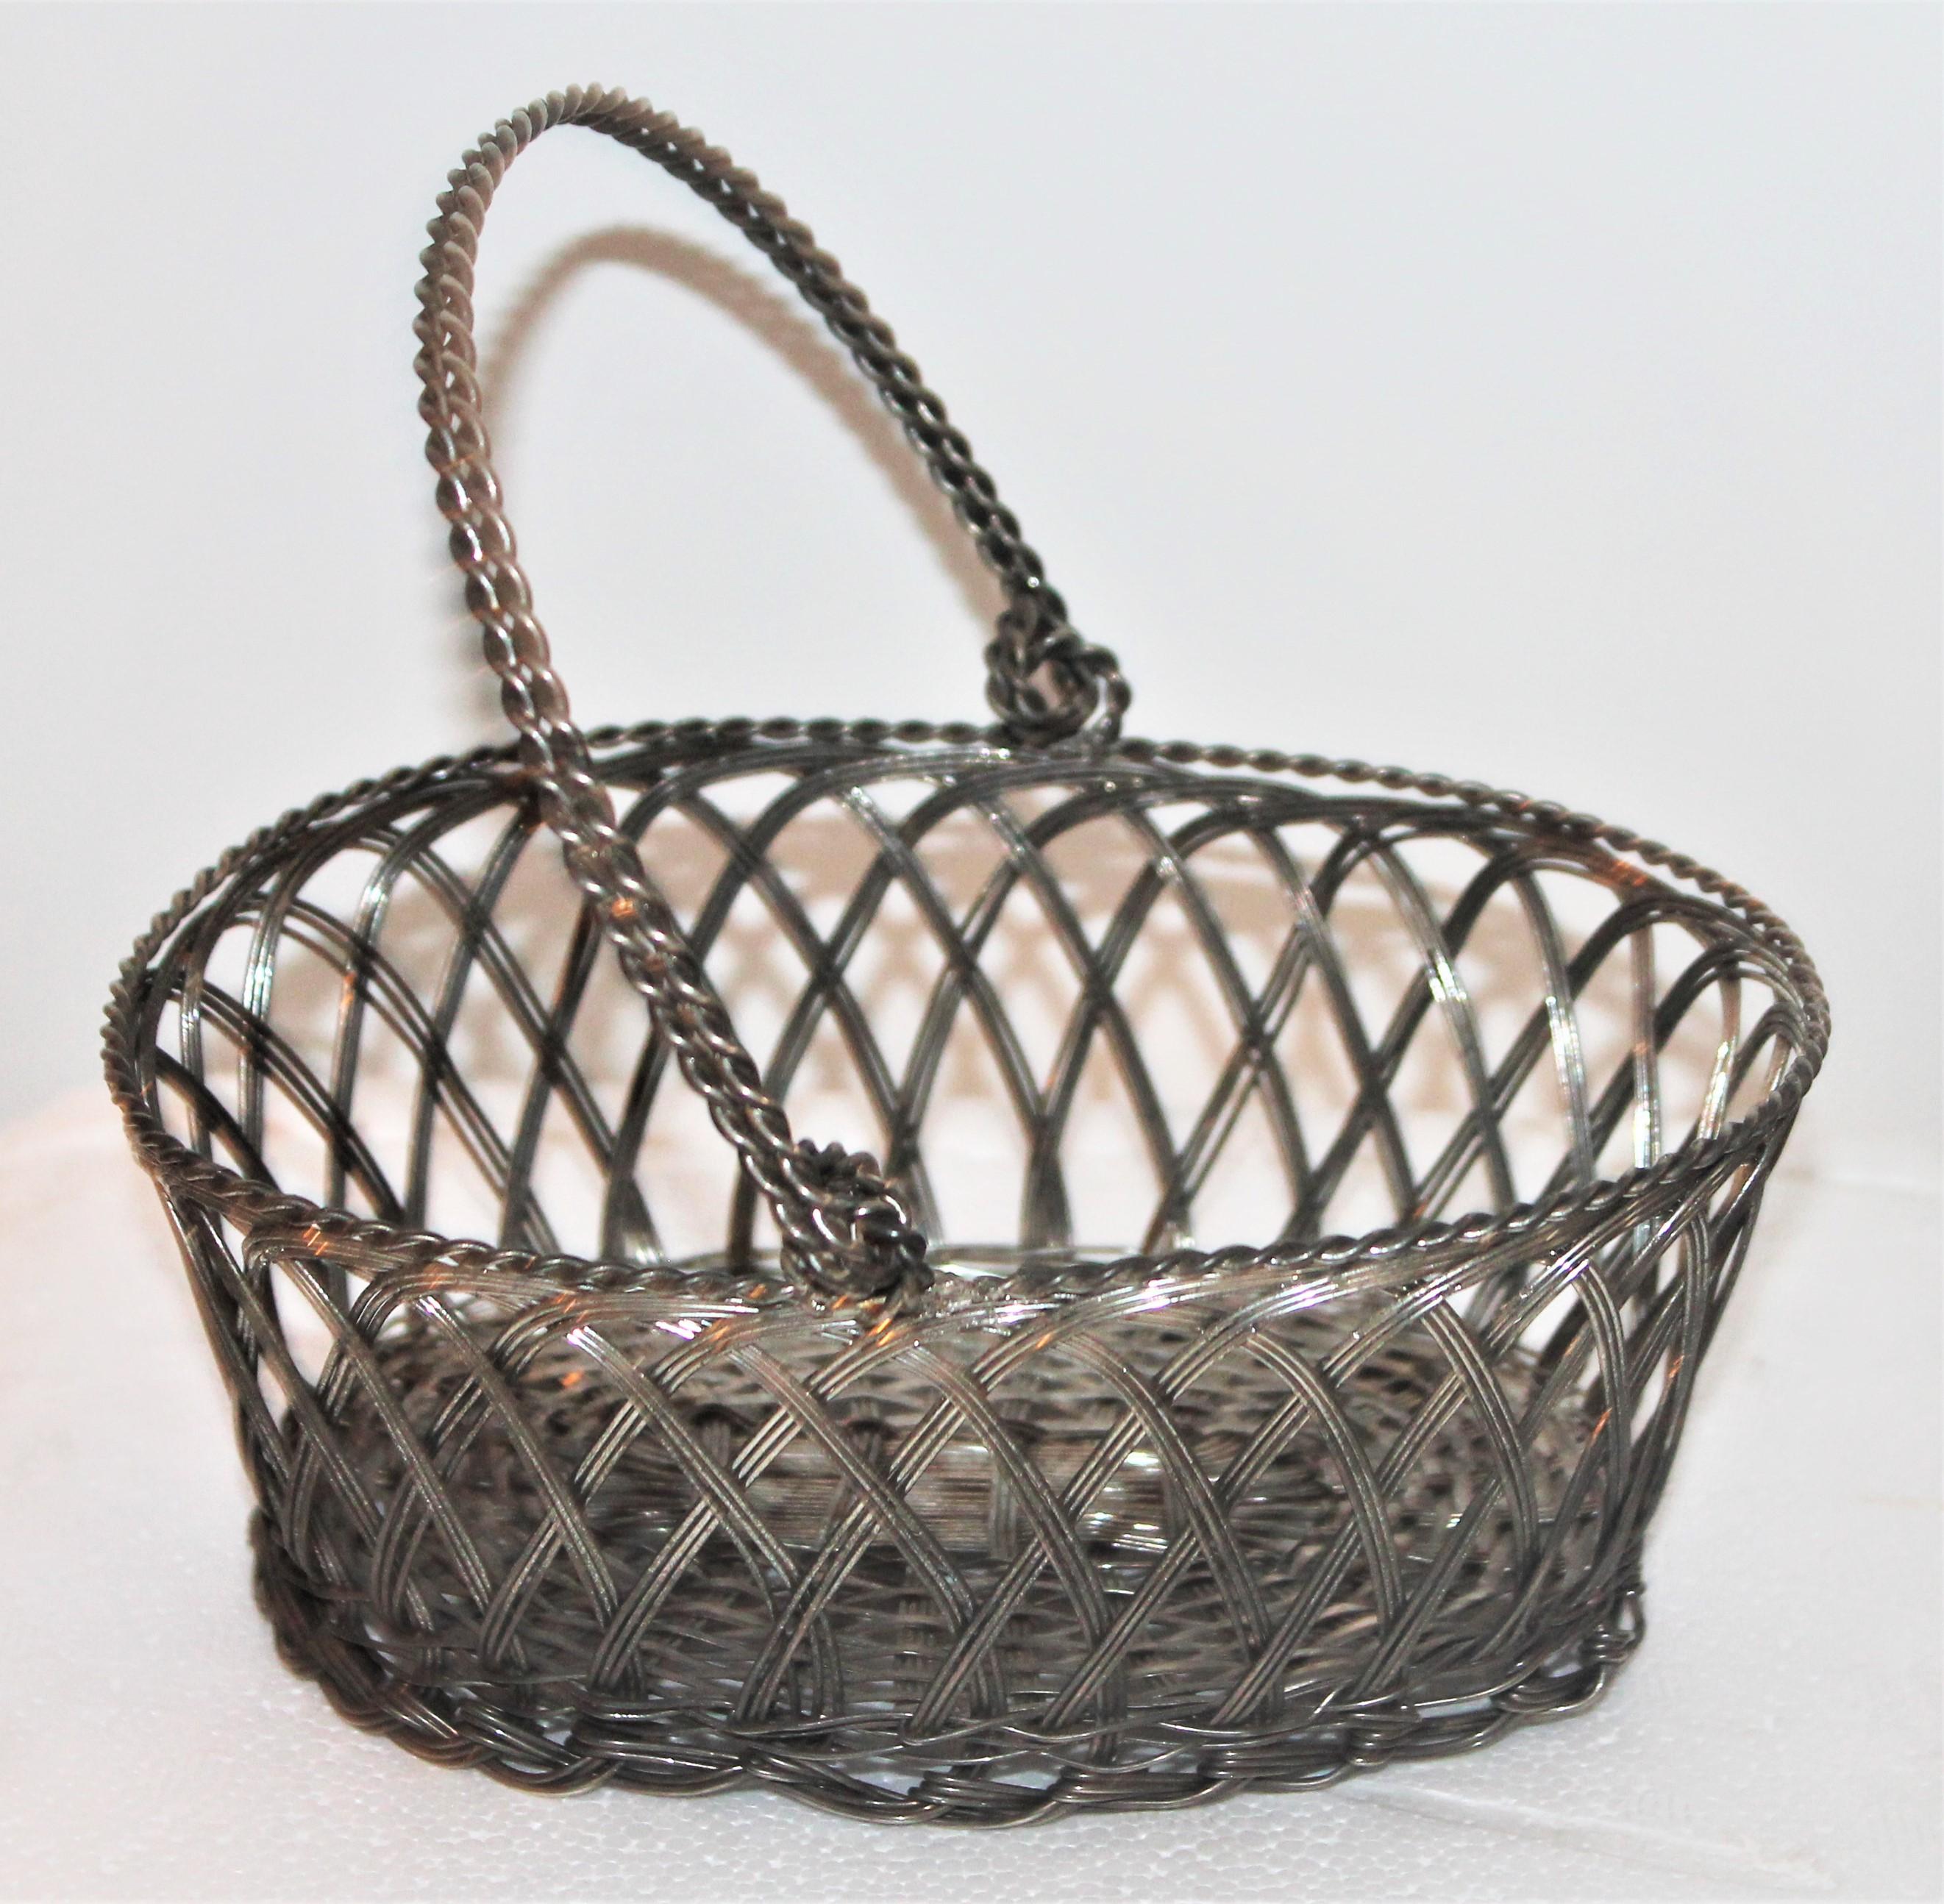 Early 20thc sterling wire basket. The condition is very good and sturdy.